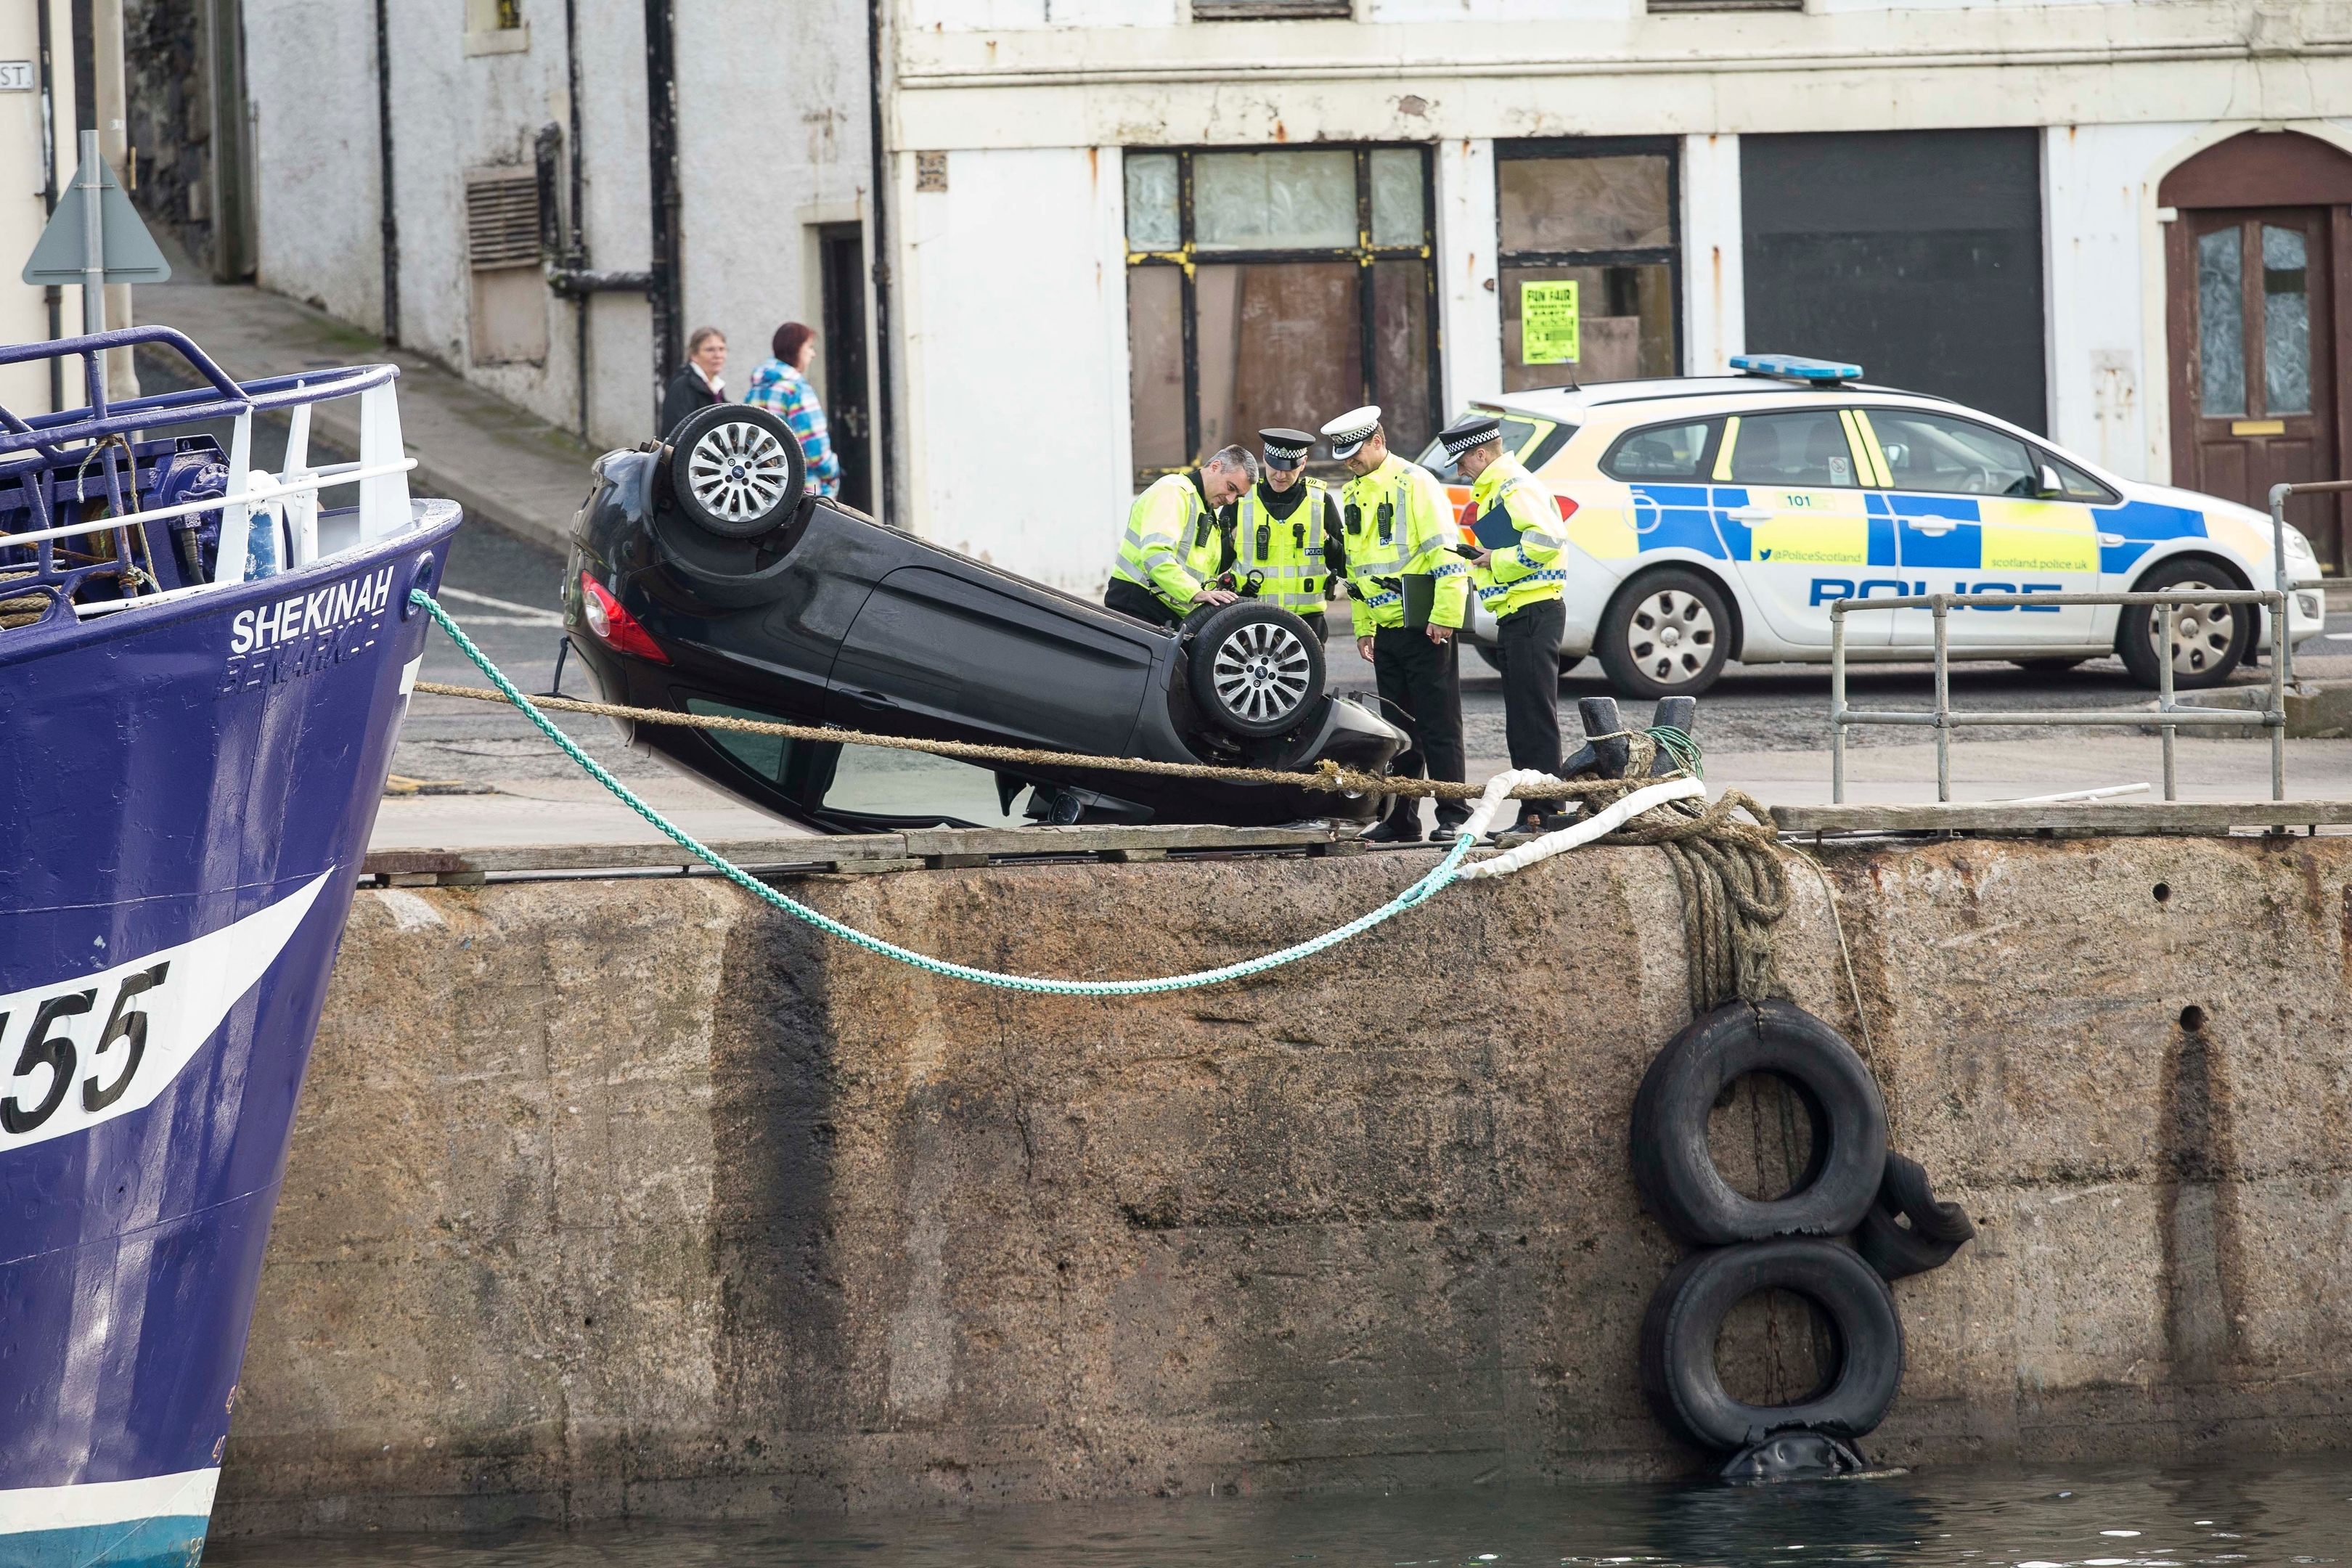 Officers with the car that entered the harbour